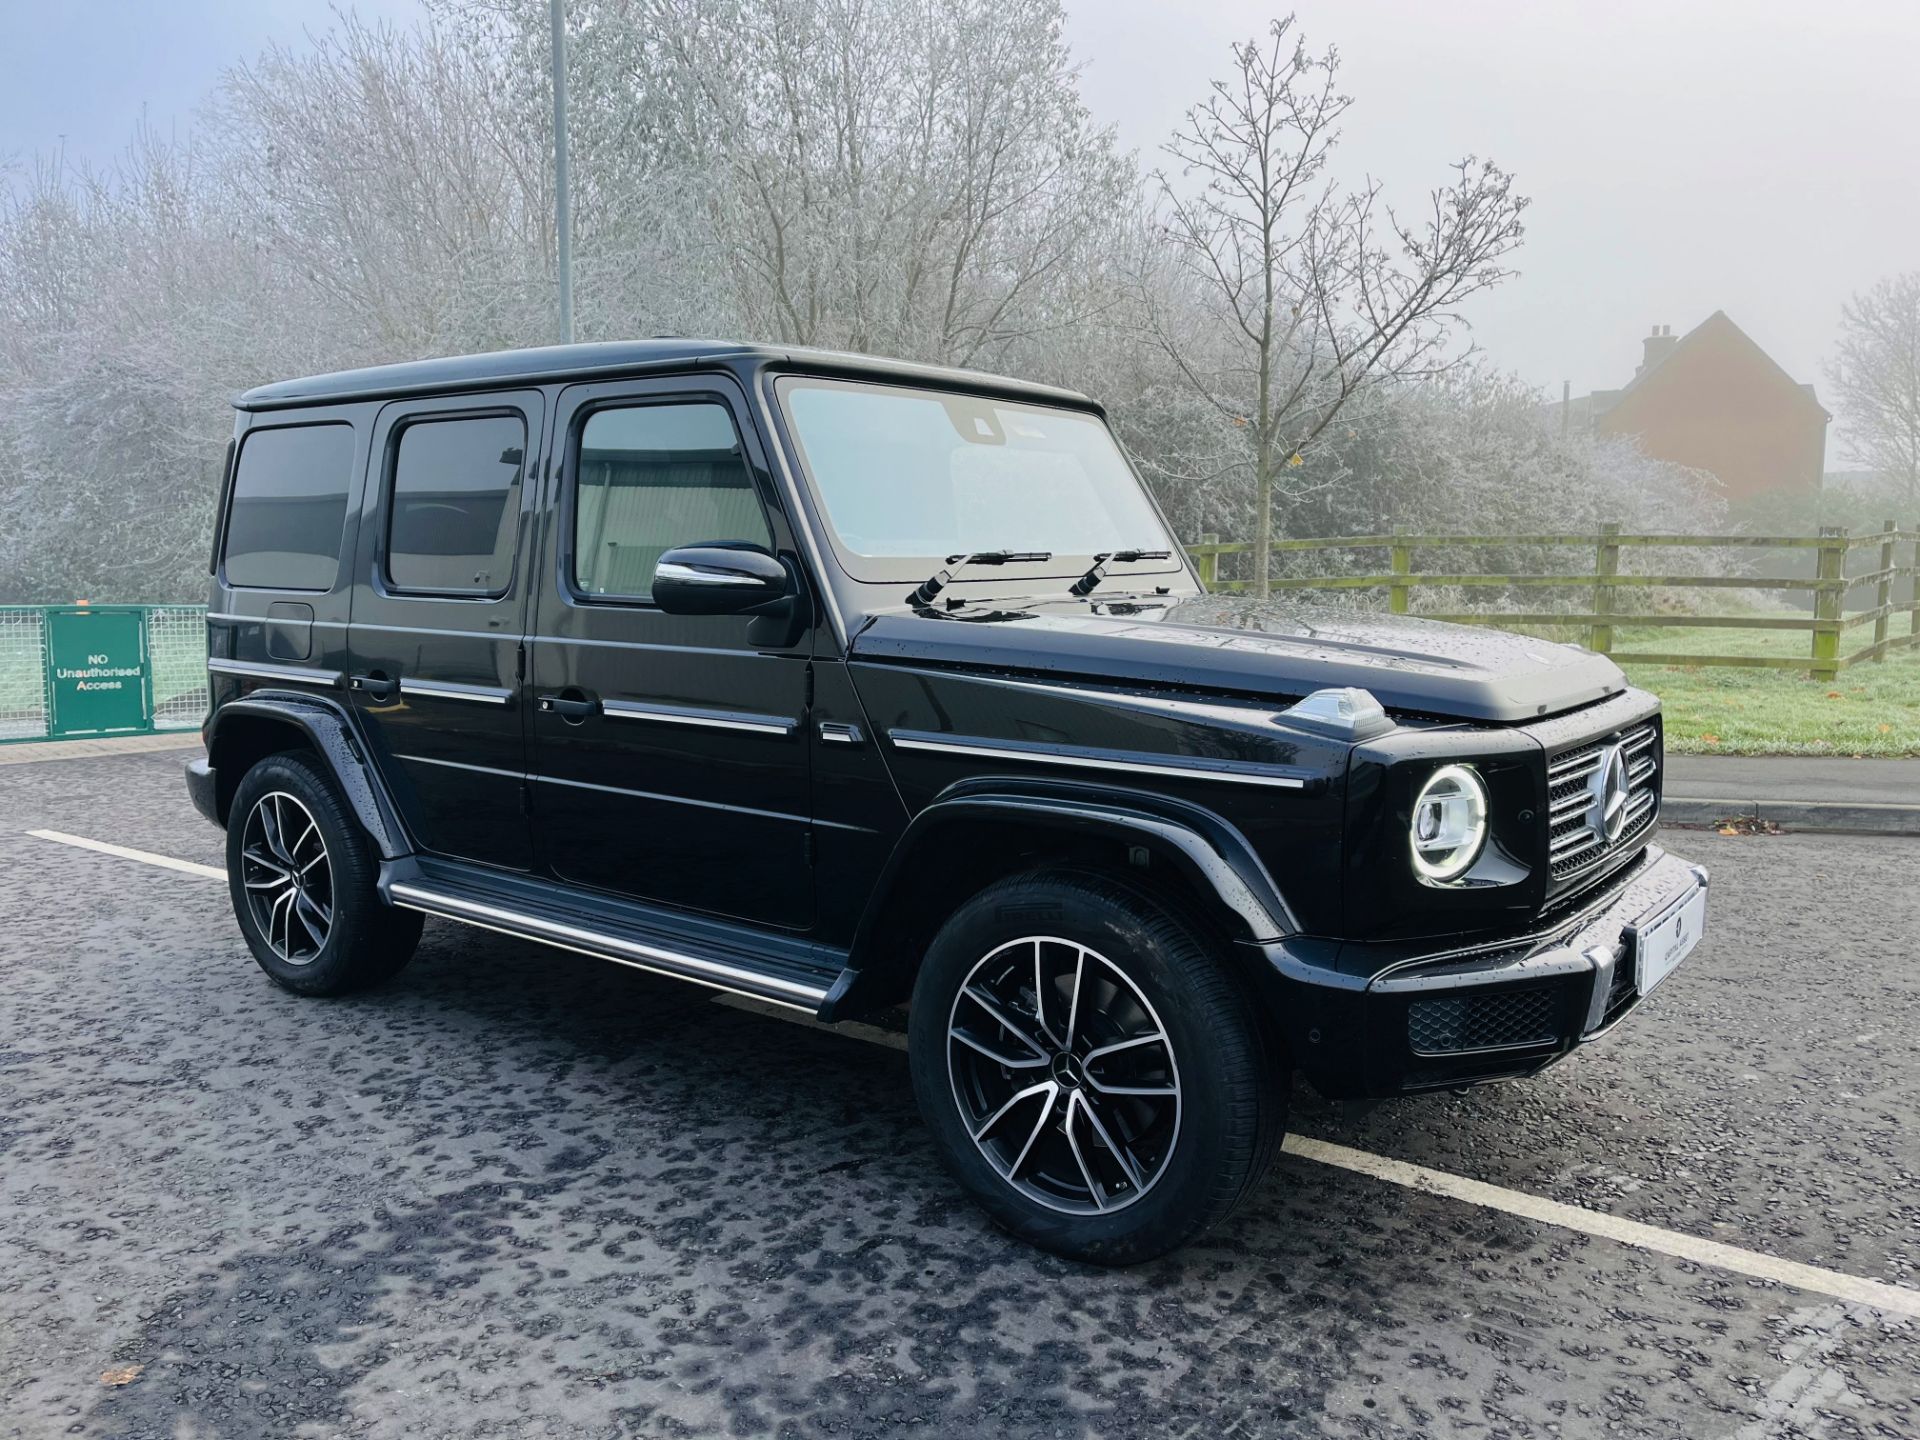 MERCEDES G400d AMG-LINE PREMIUM PLUS (72 REG) 1 OWNER WITH ONLY 9500 MILES - GREAT SPEC - Image 2 of 45